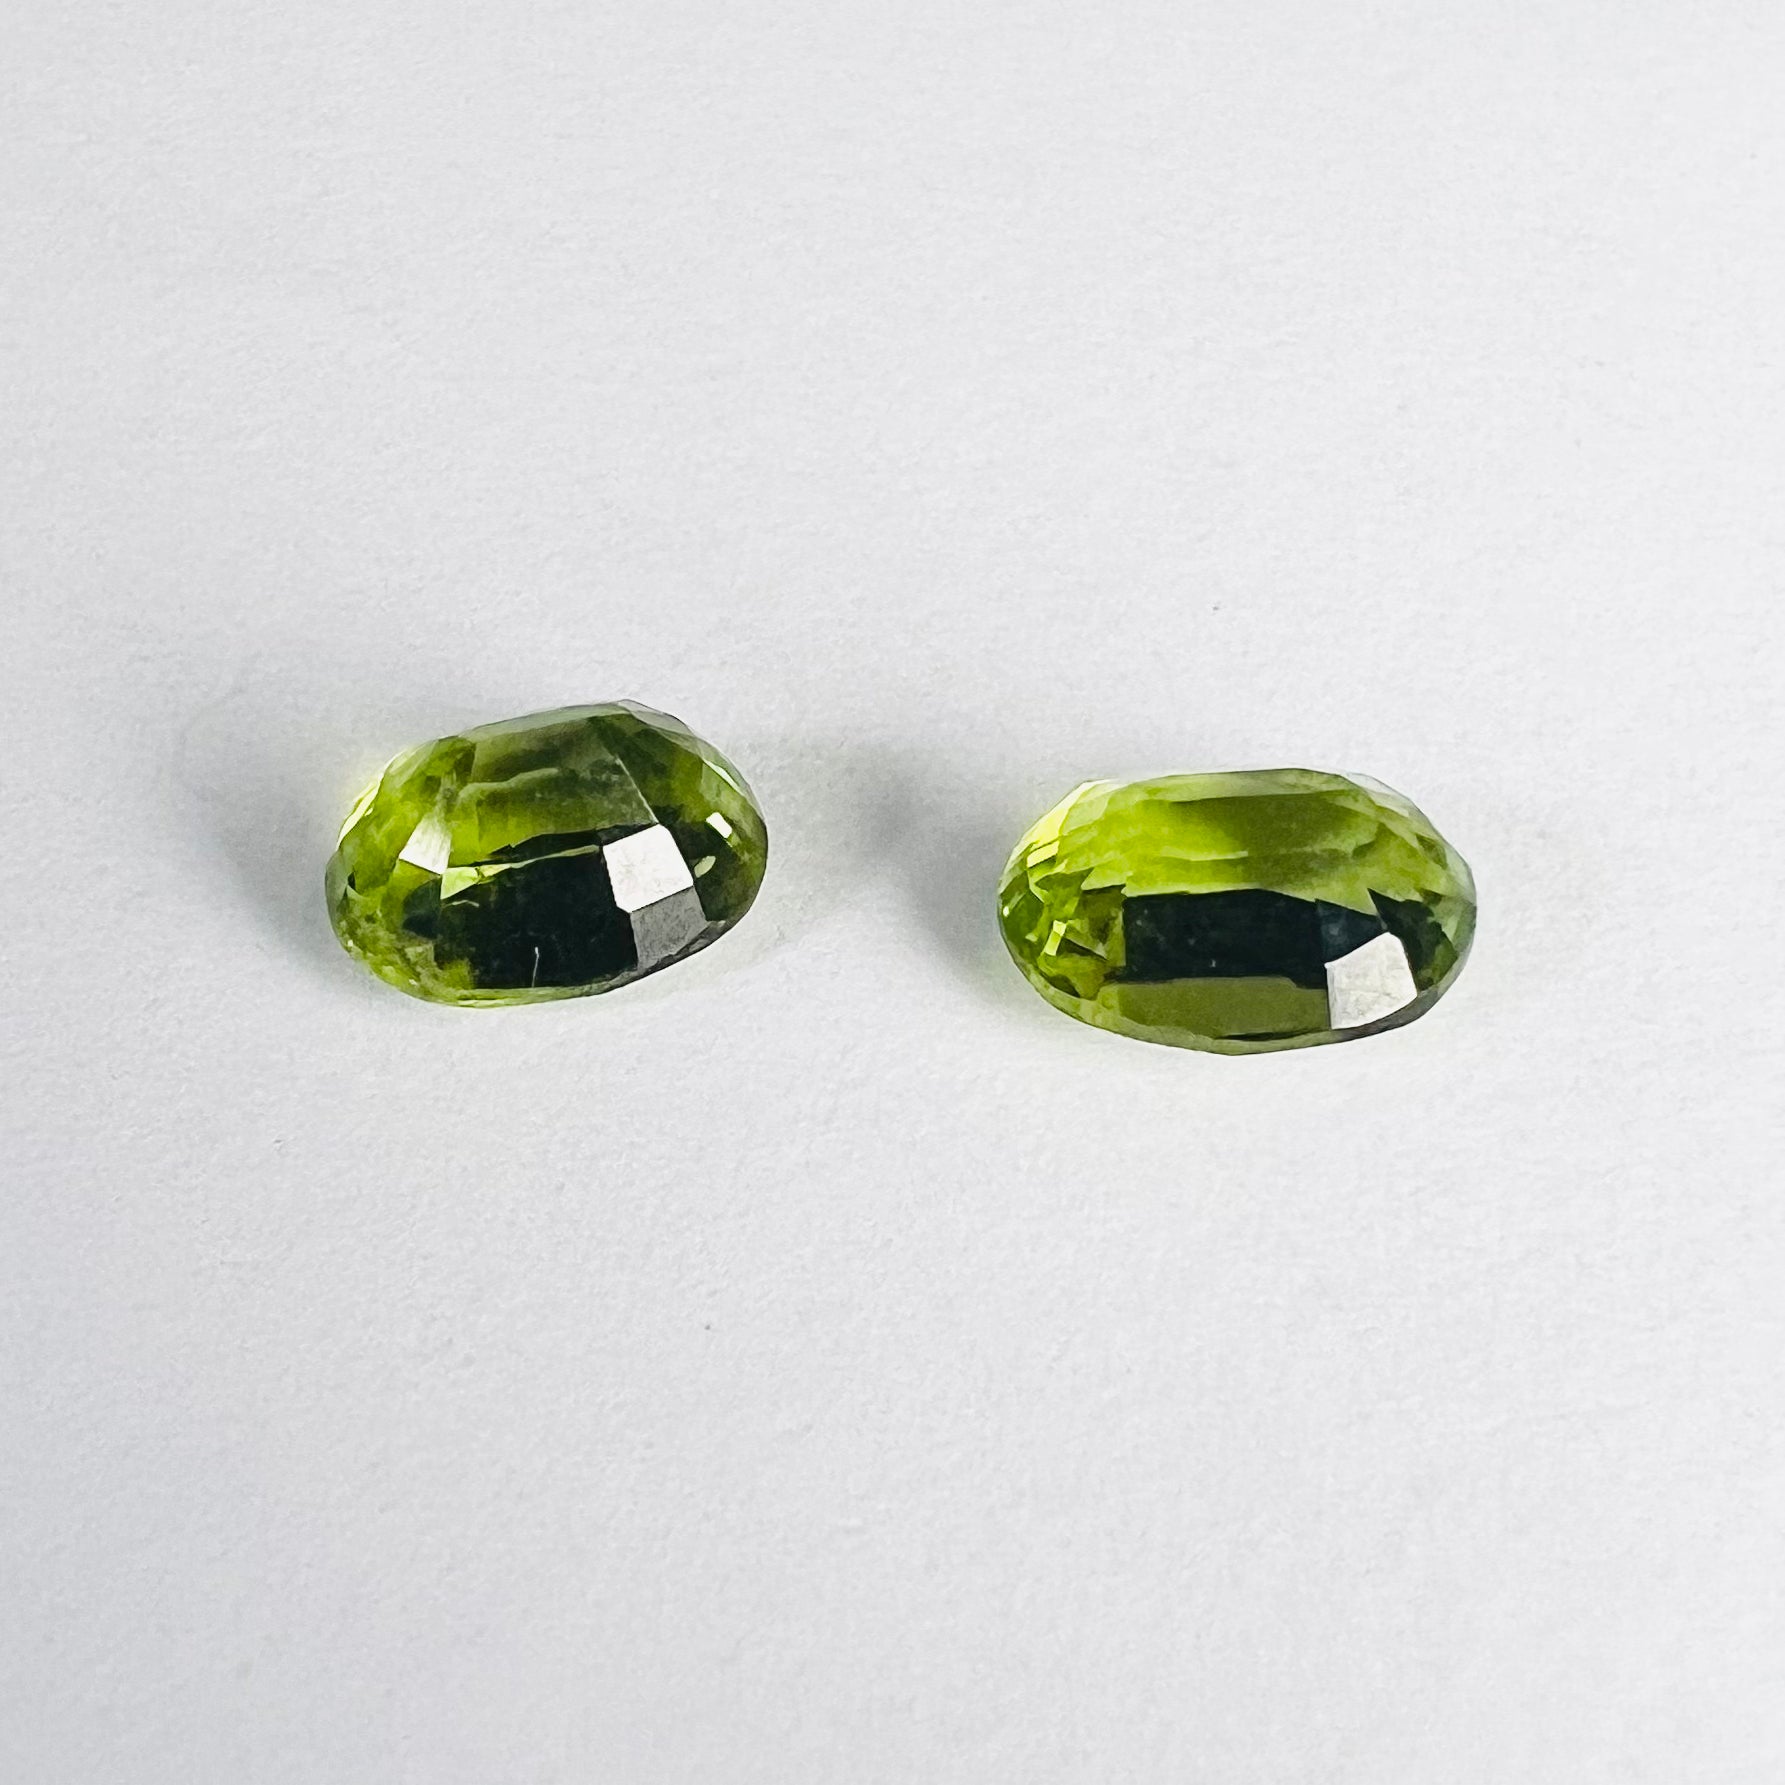 3.12CTW Pair of Loose Natural Oval Cut Peridot 8.10x6.05x4mm Earth mined Gemstone